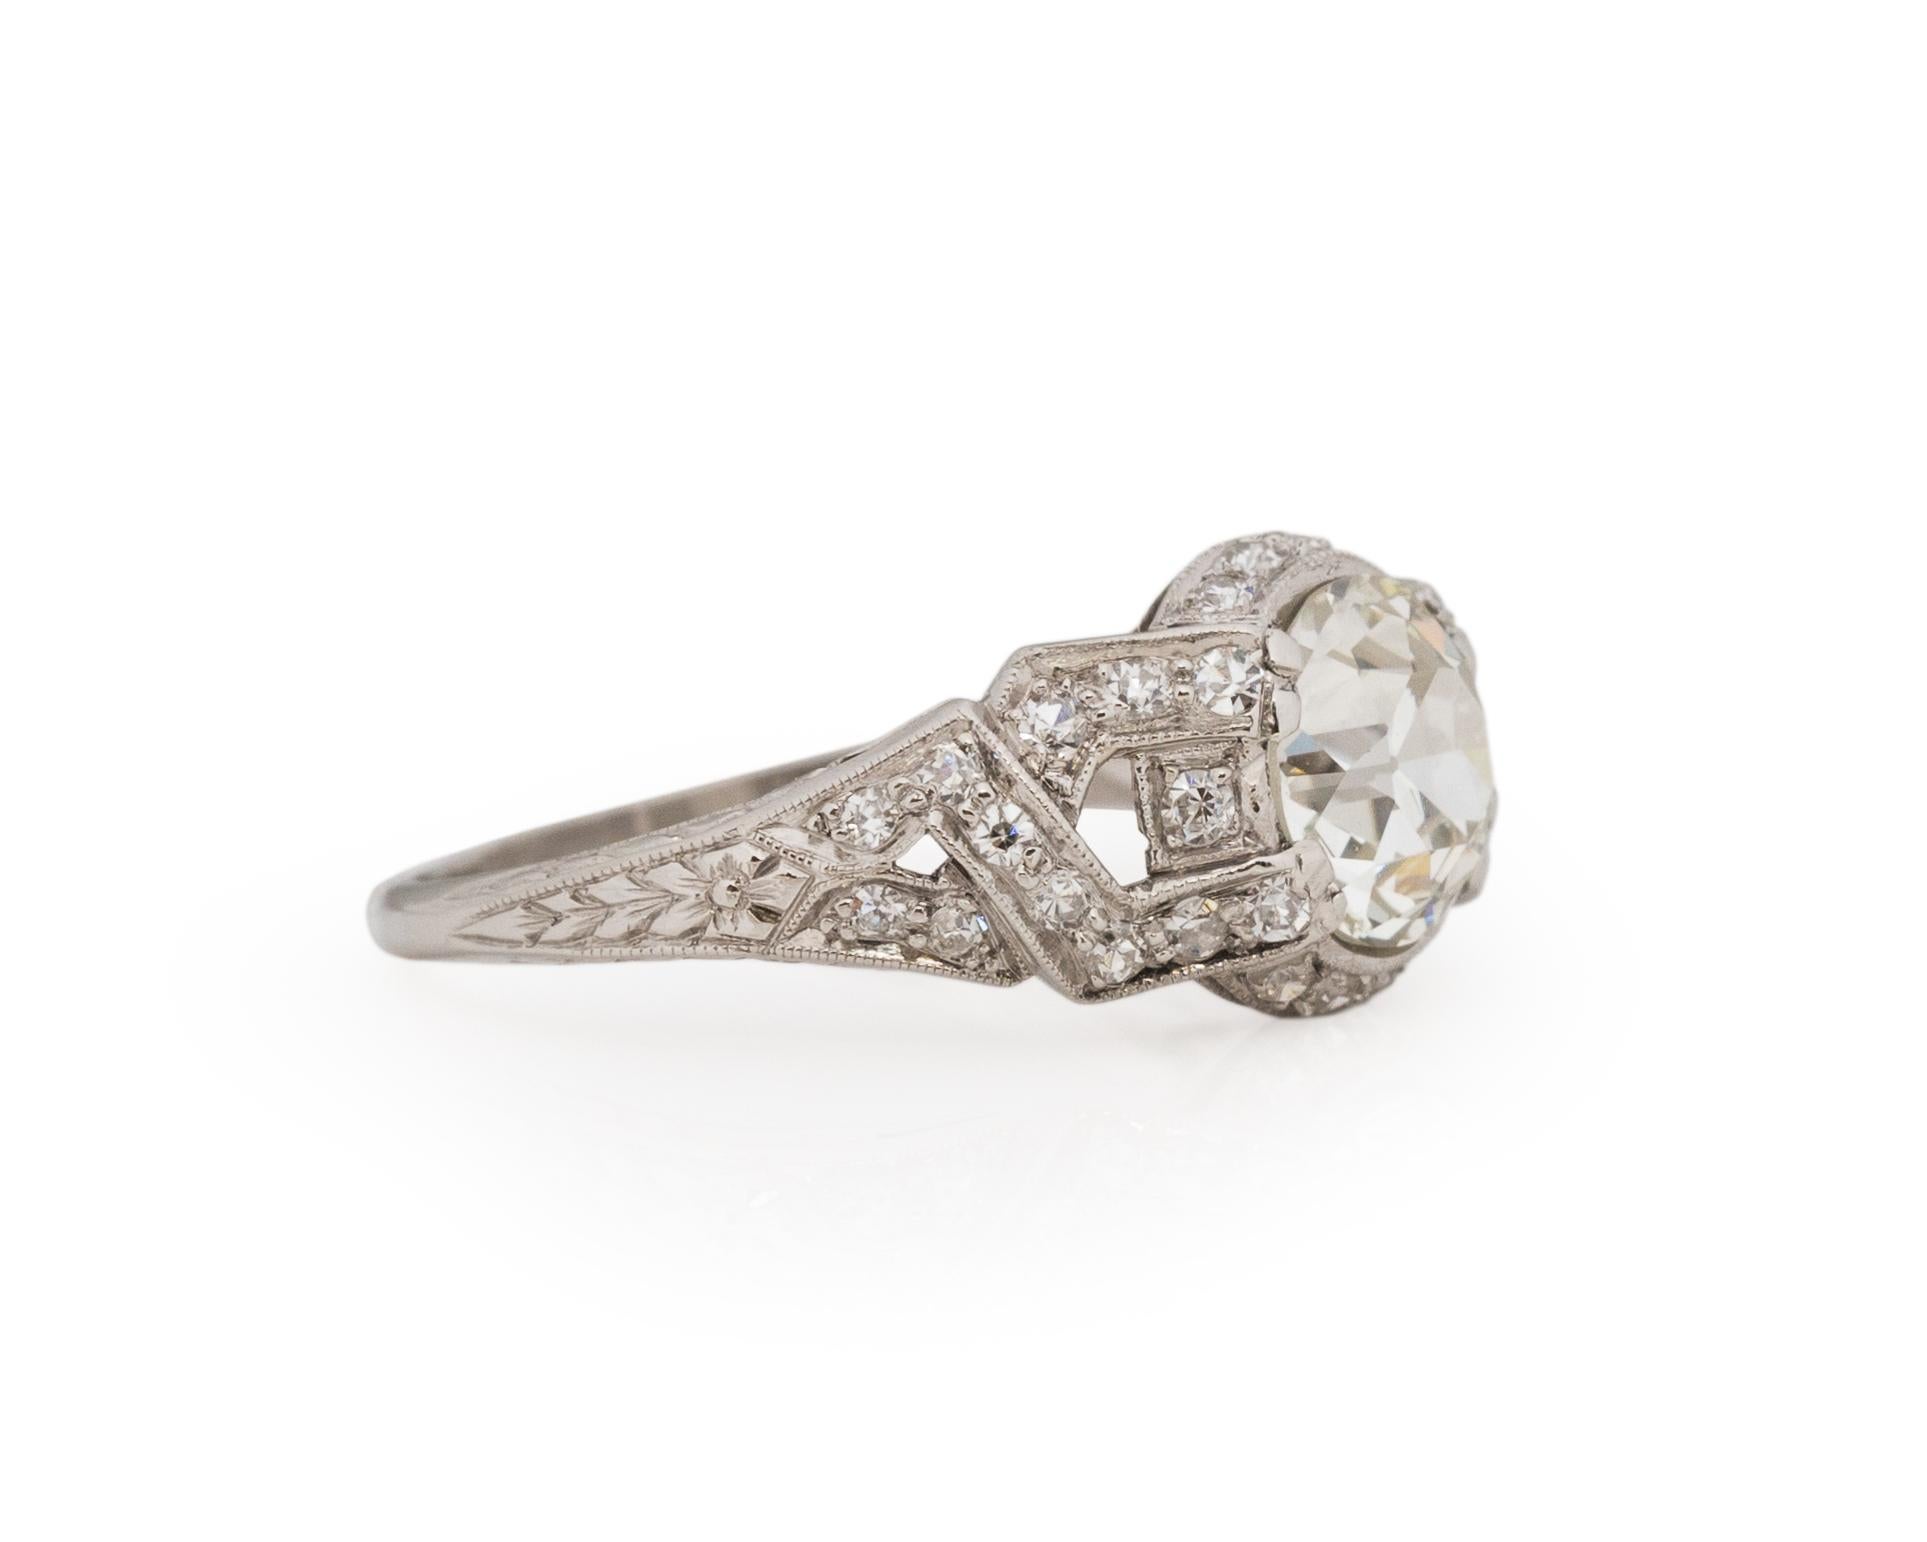 Ring Size: 6.25
Metal Type: Platinum [Hallmarked, and Tested]
Weight: 3.0 grams

Center Diamond Details:
GIA REPORT #: 2225336056
Weight: 1.59ct
Cut: Old European brilliant
Color: K
Clarity: VS1
Measurements: 7.33mm x 7.18 x 4.60mm

Side Stone